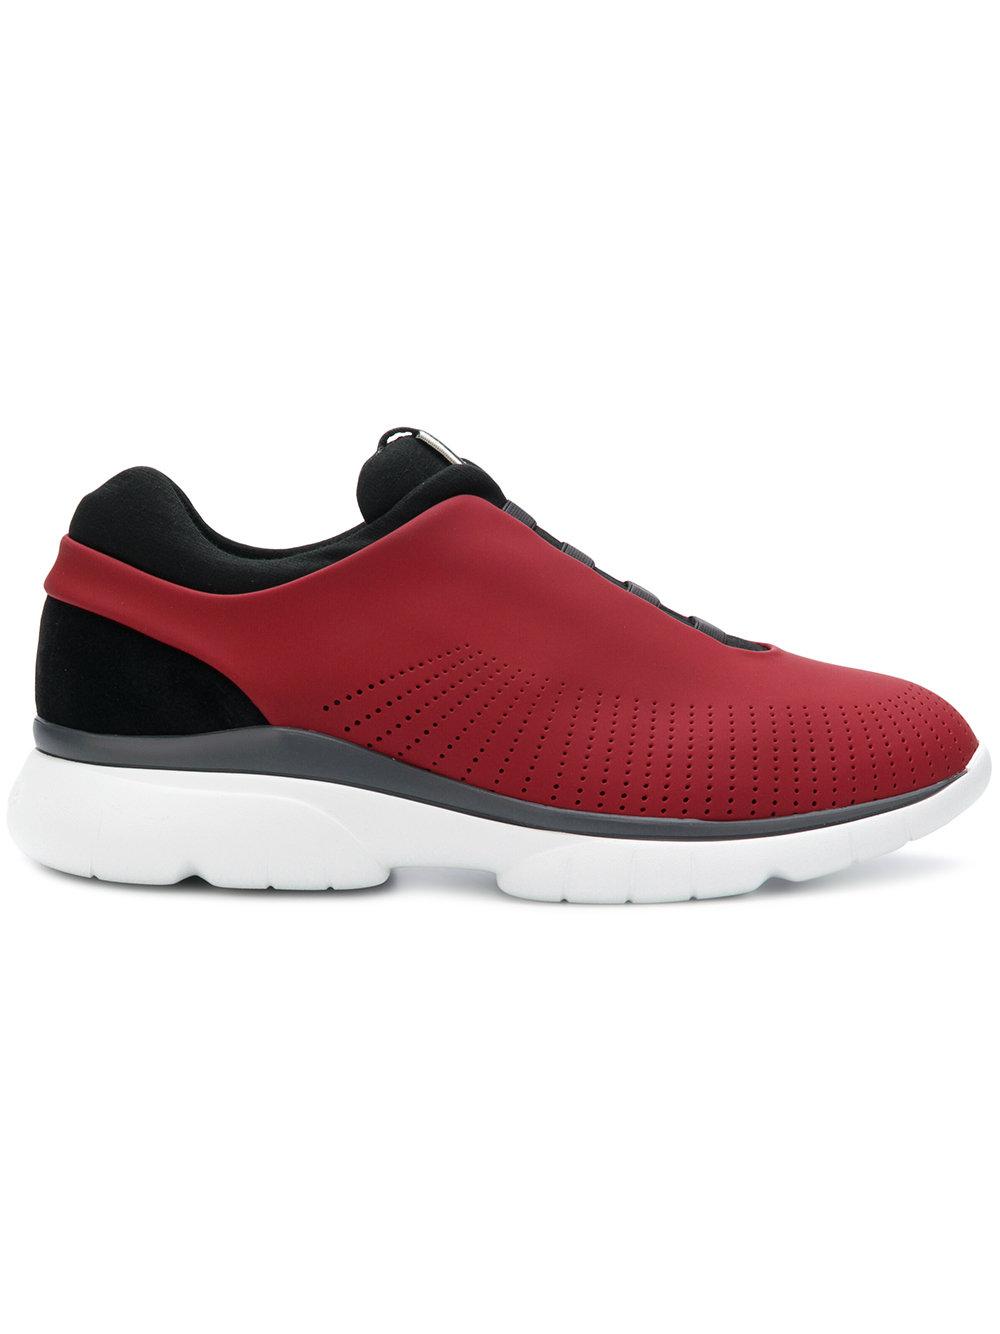 Z Zegna Cotton Sprinter Sneakers in Red for Men - Lyst